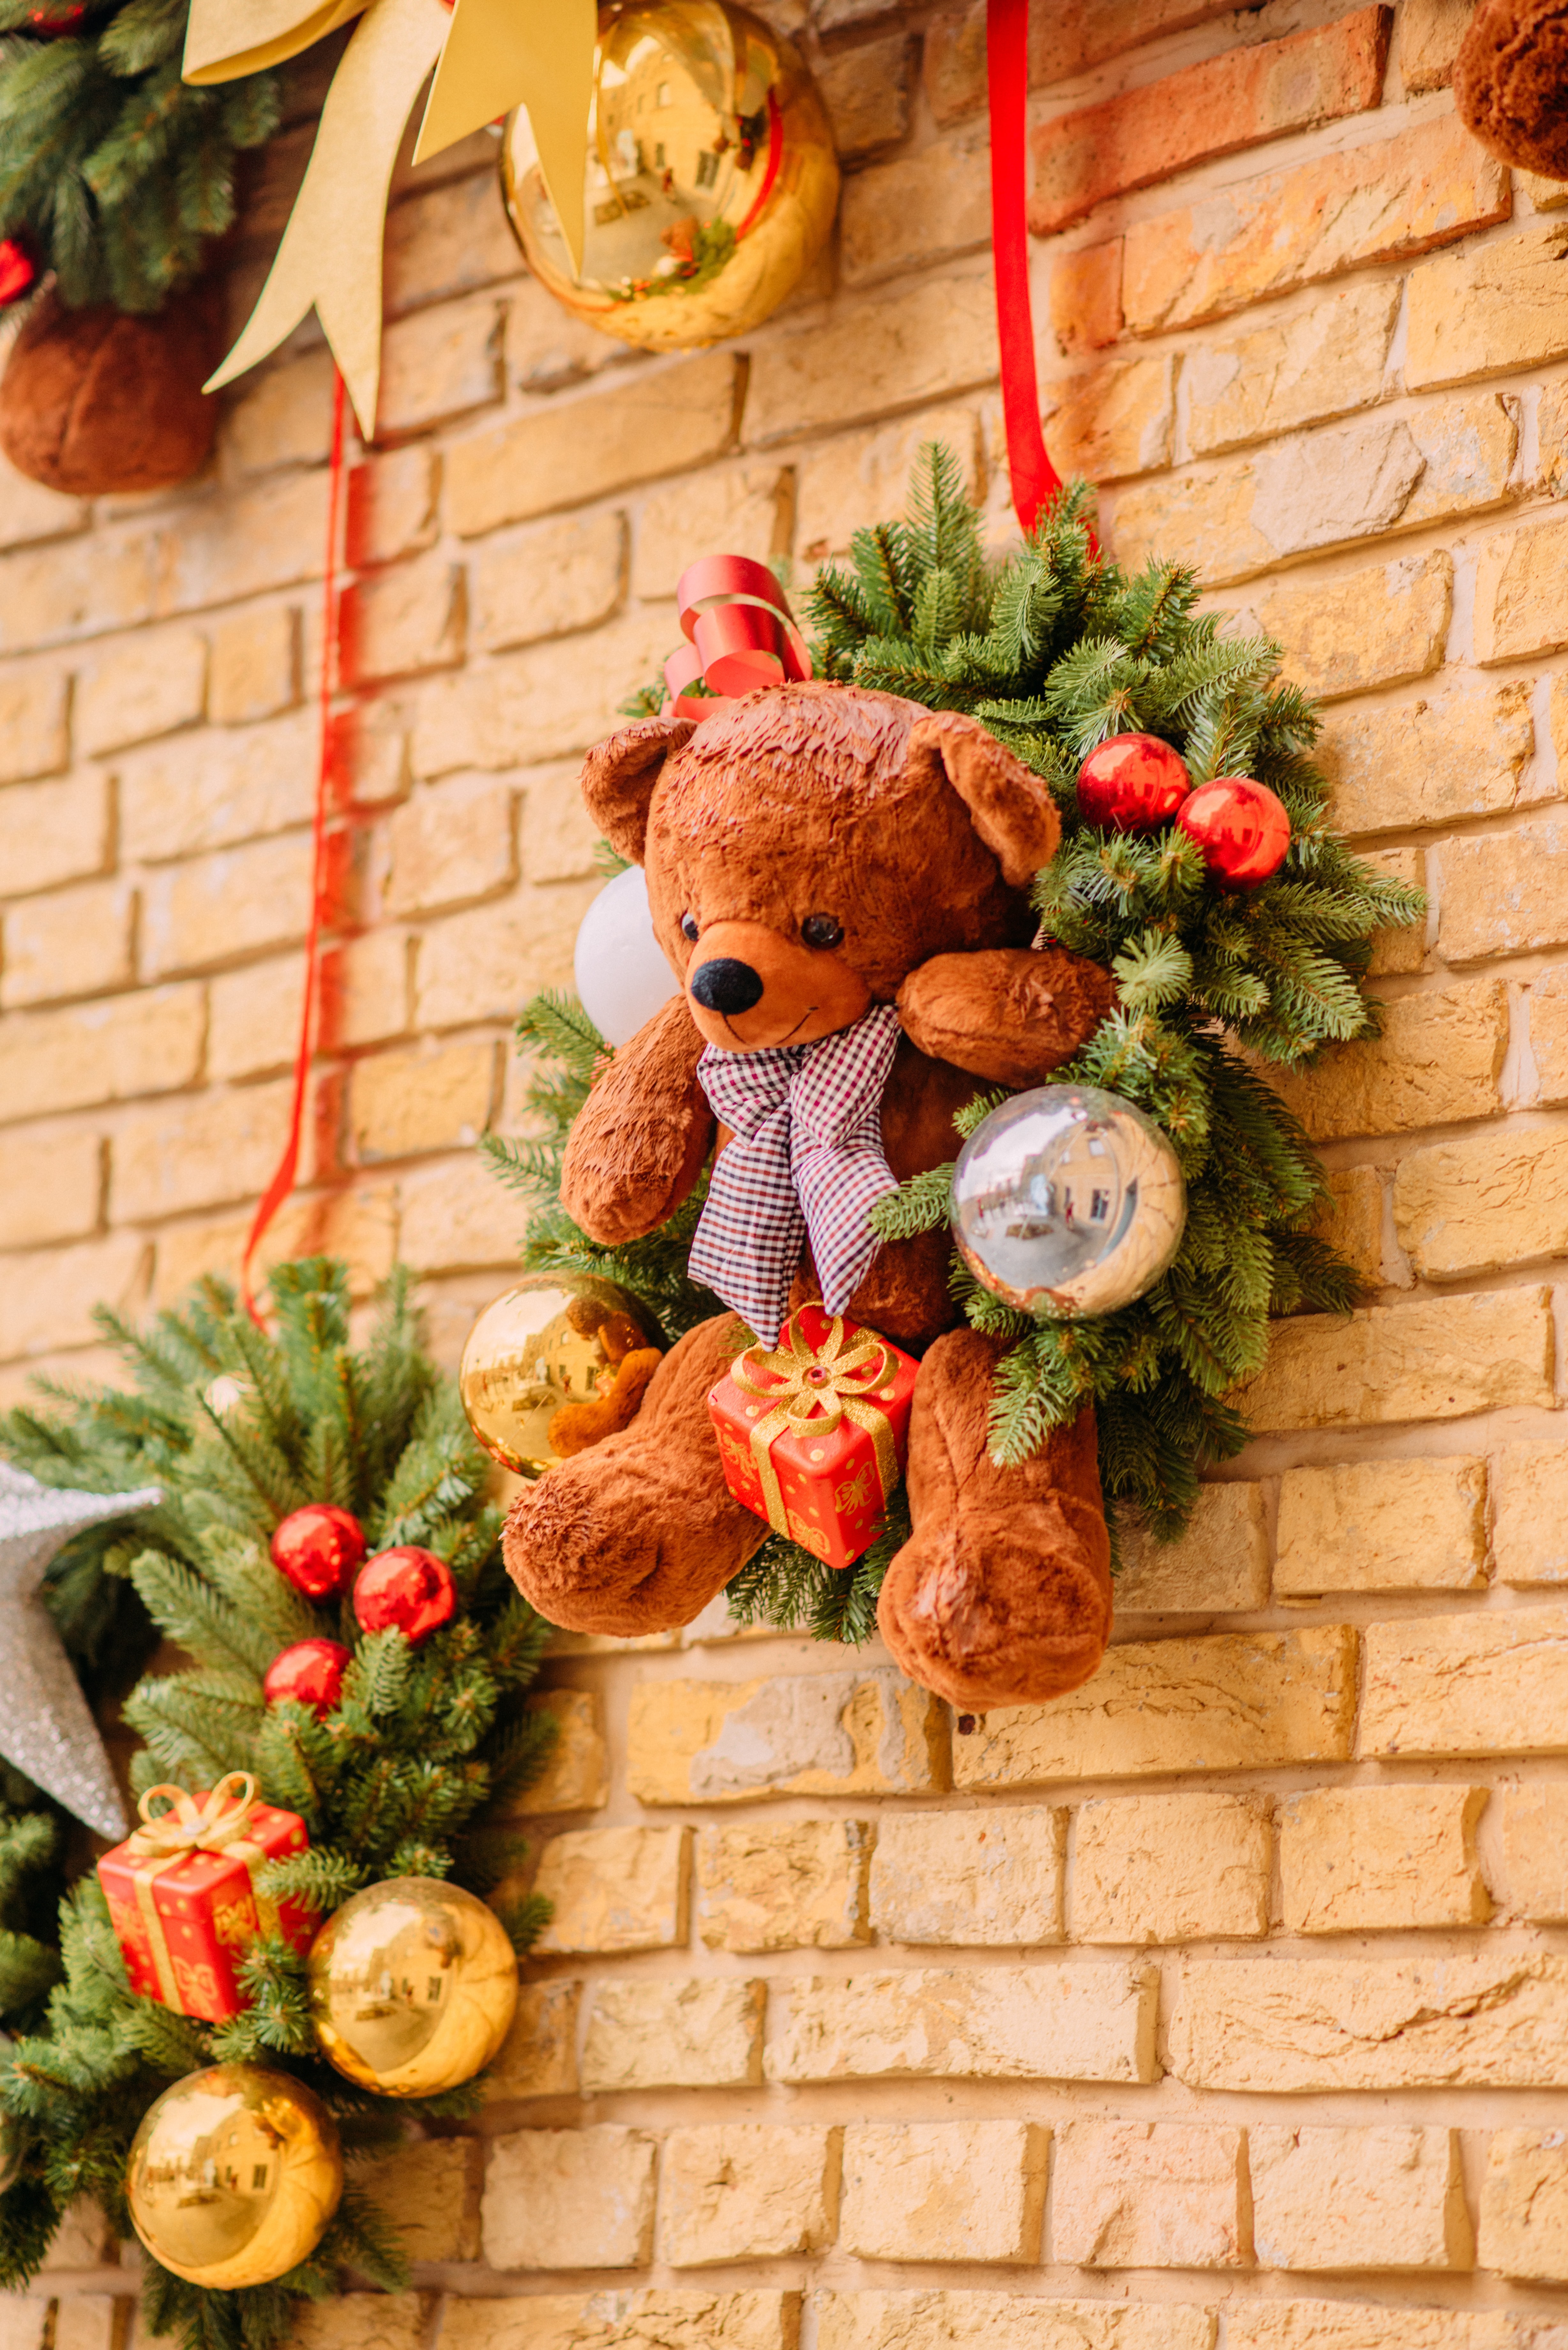 android teddy bear, christmas, holidays, new year, decorations, toy, wreath